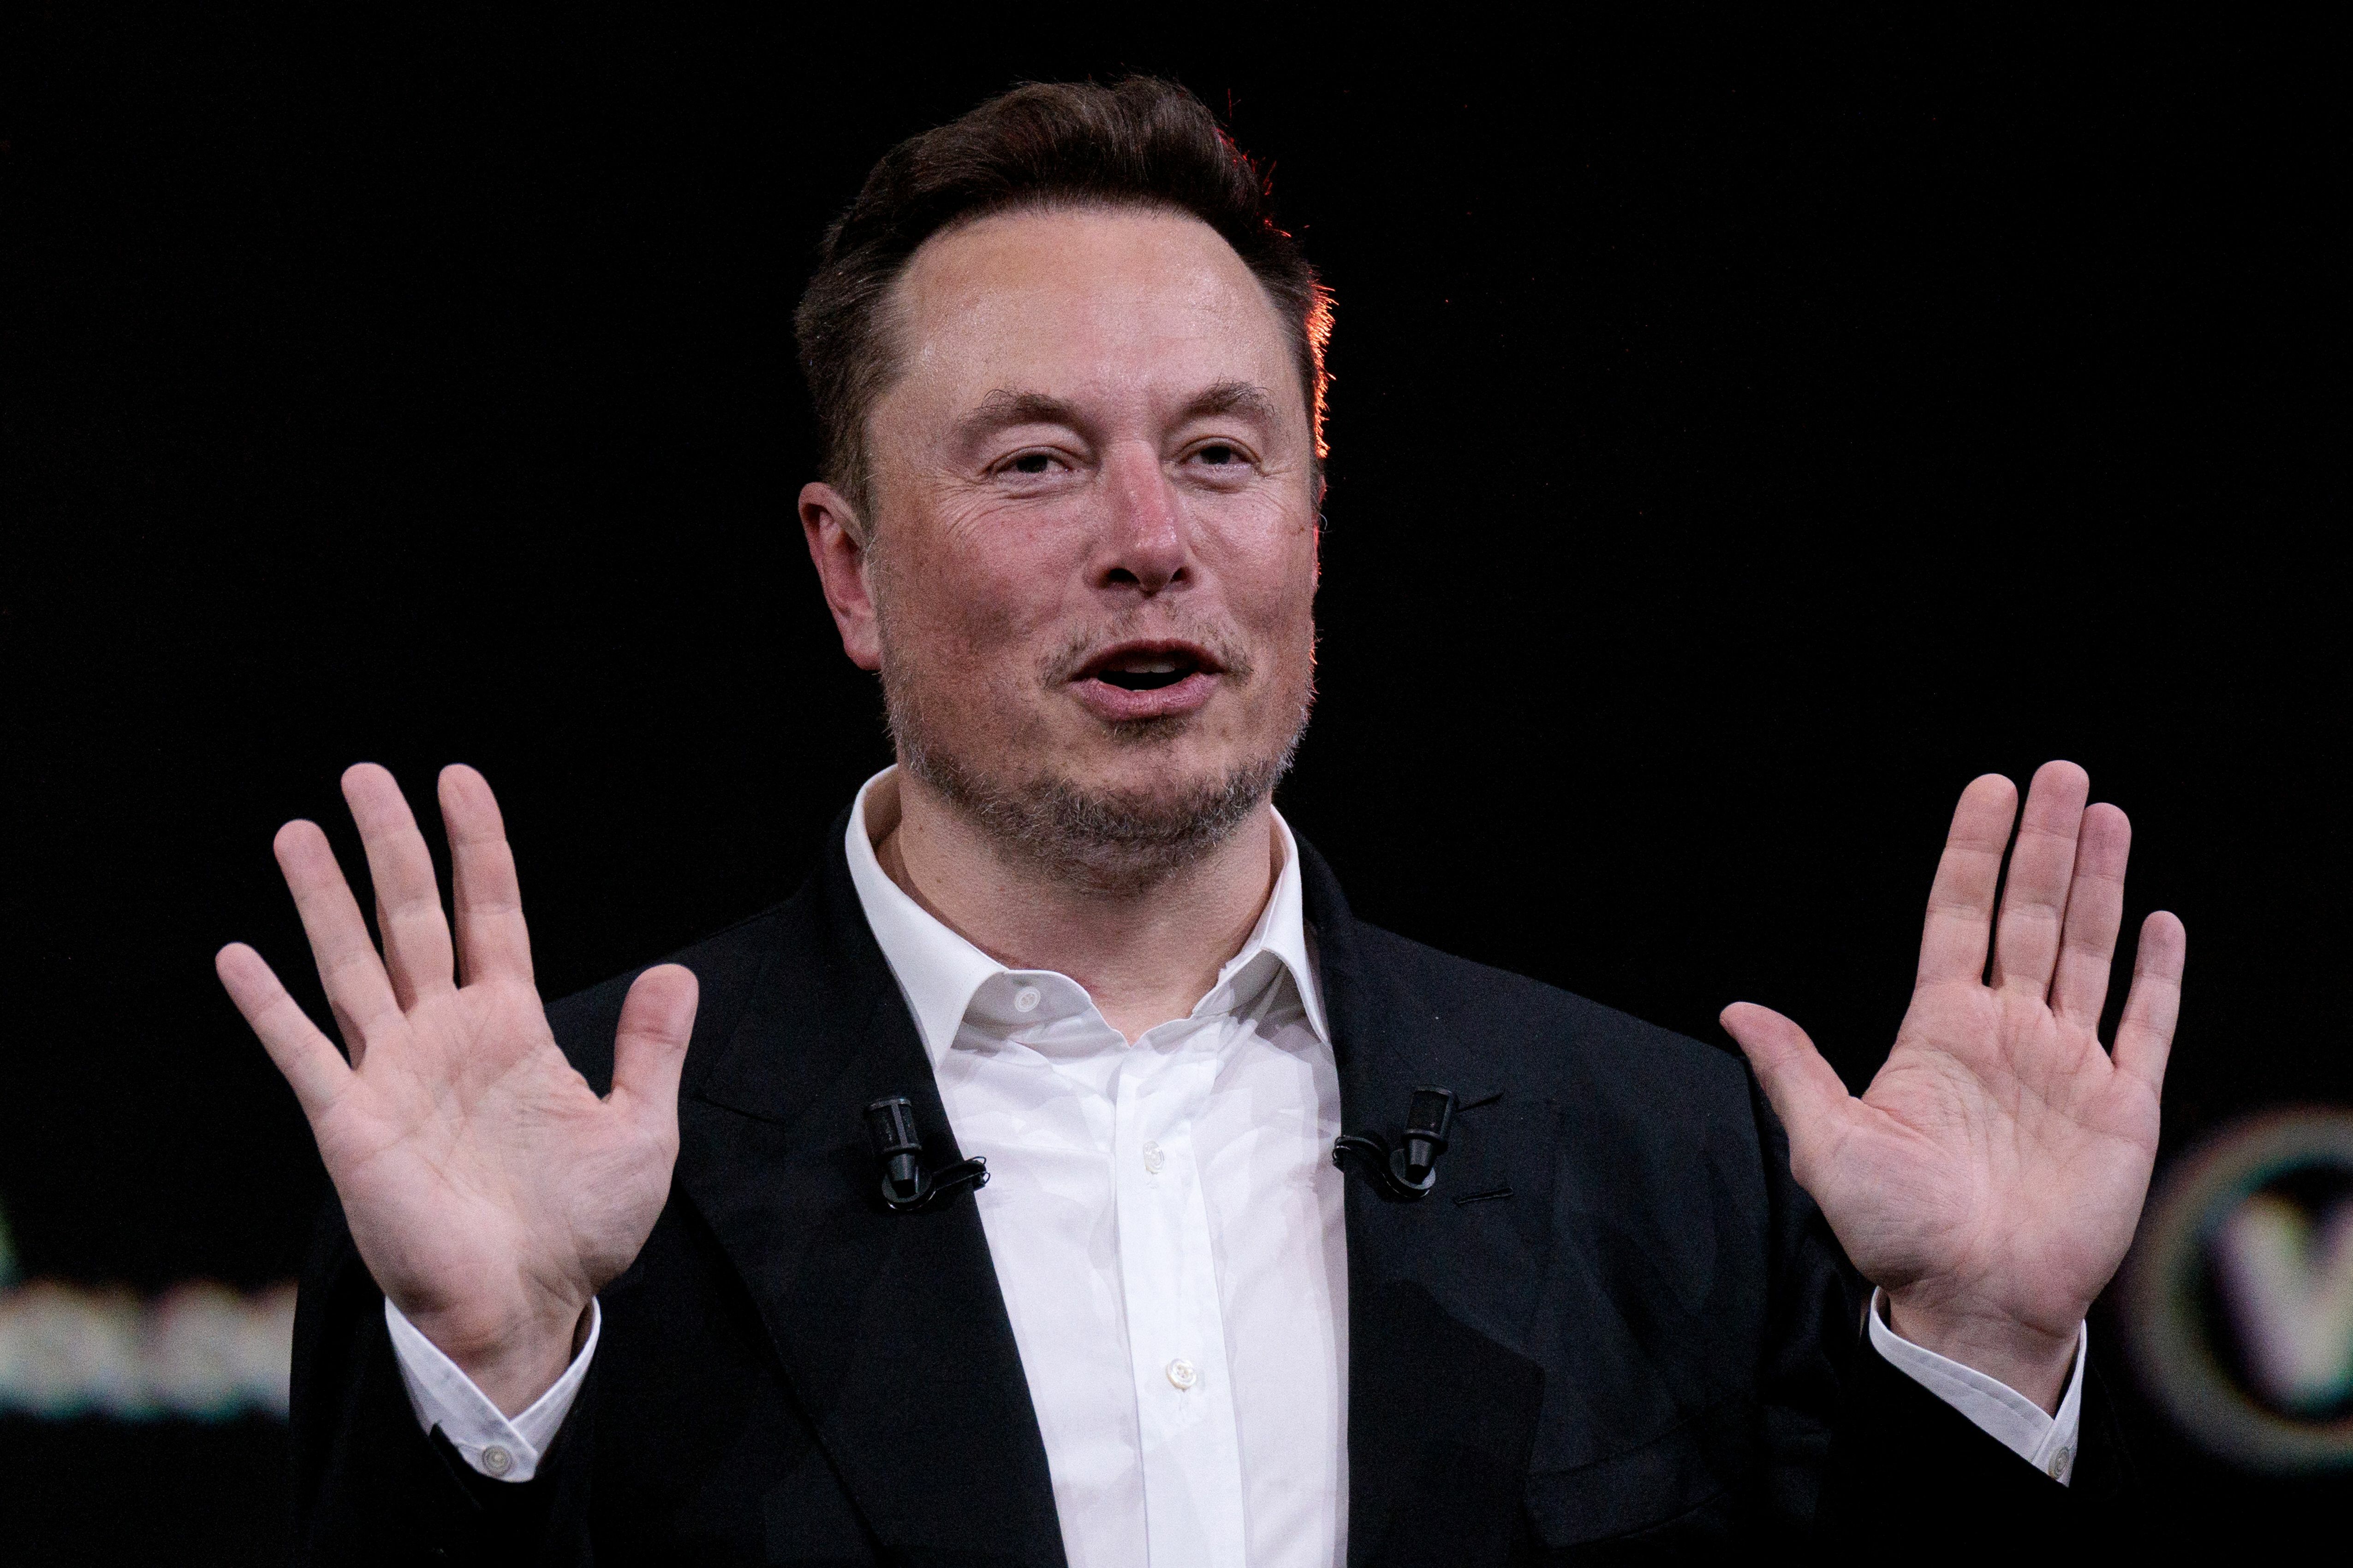 Did Musk fund his Twitter purchase with SpaceX money?